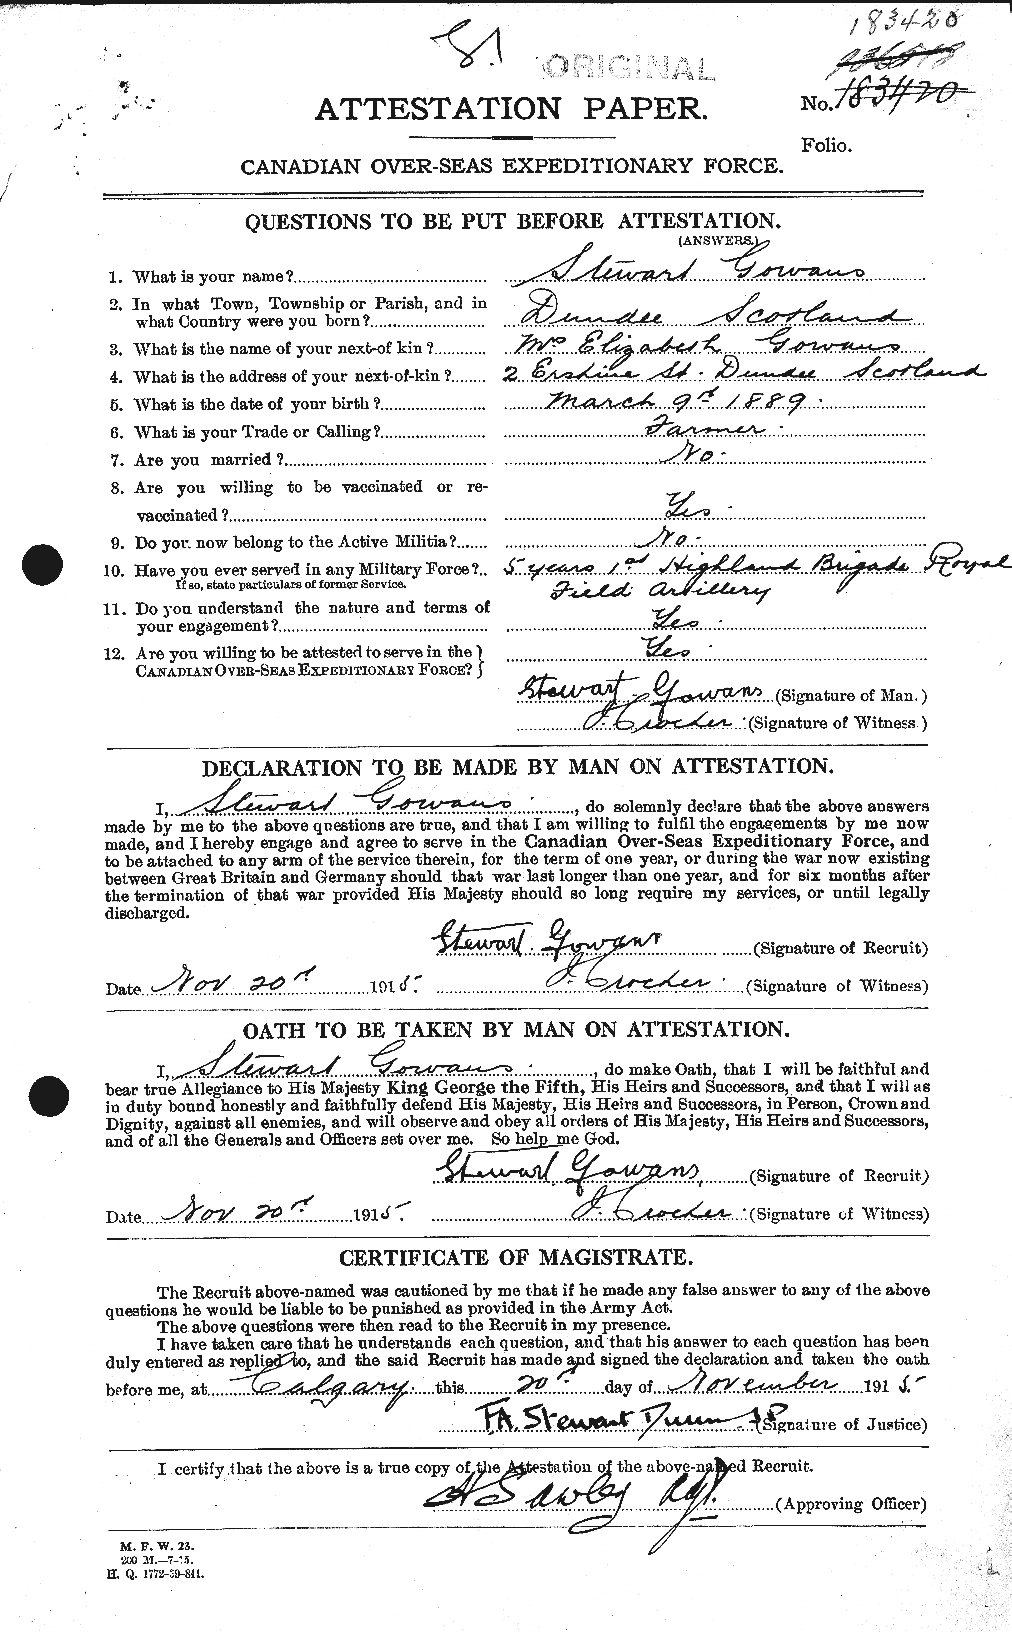 Personnel Records of the First World War - CEF 355896a